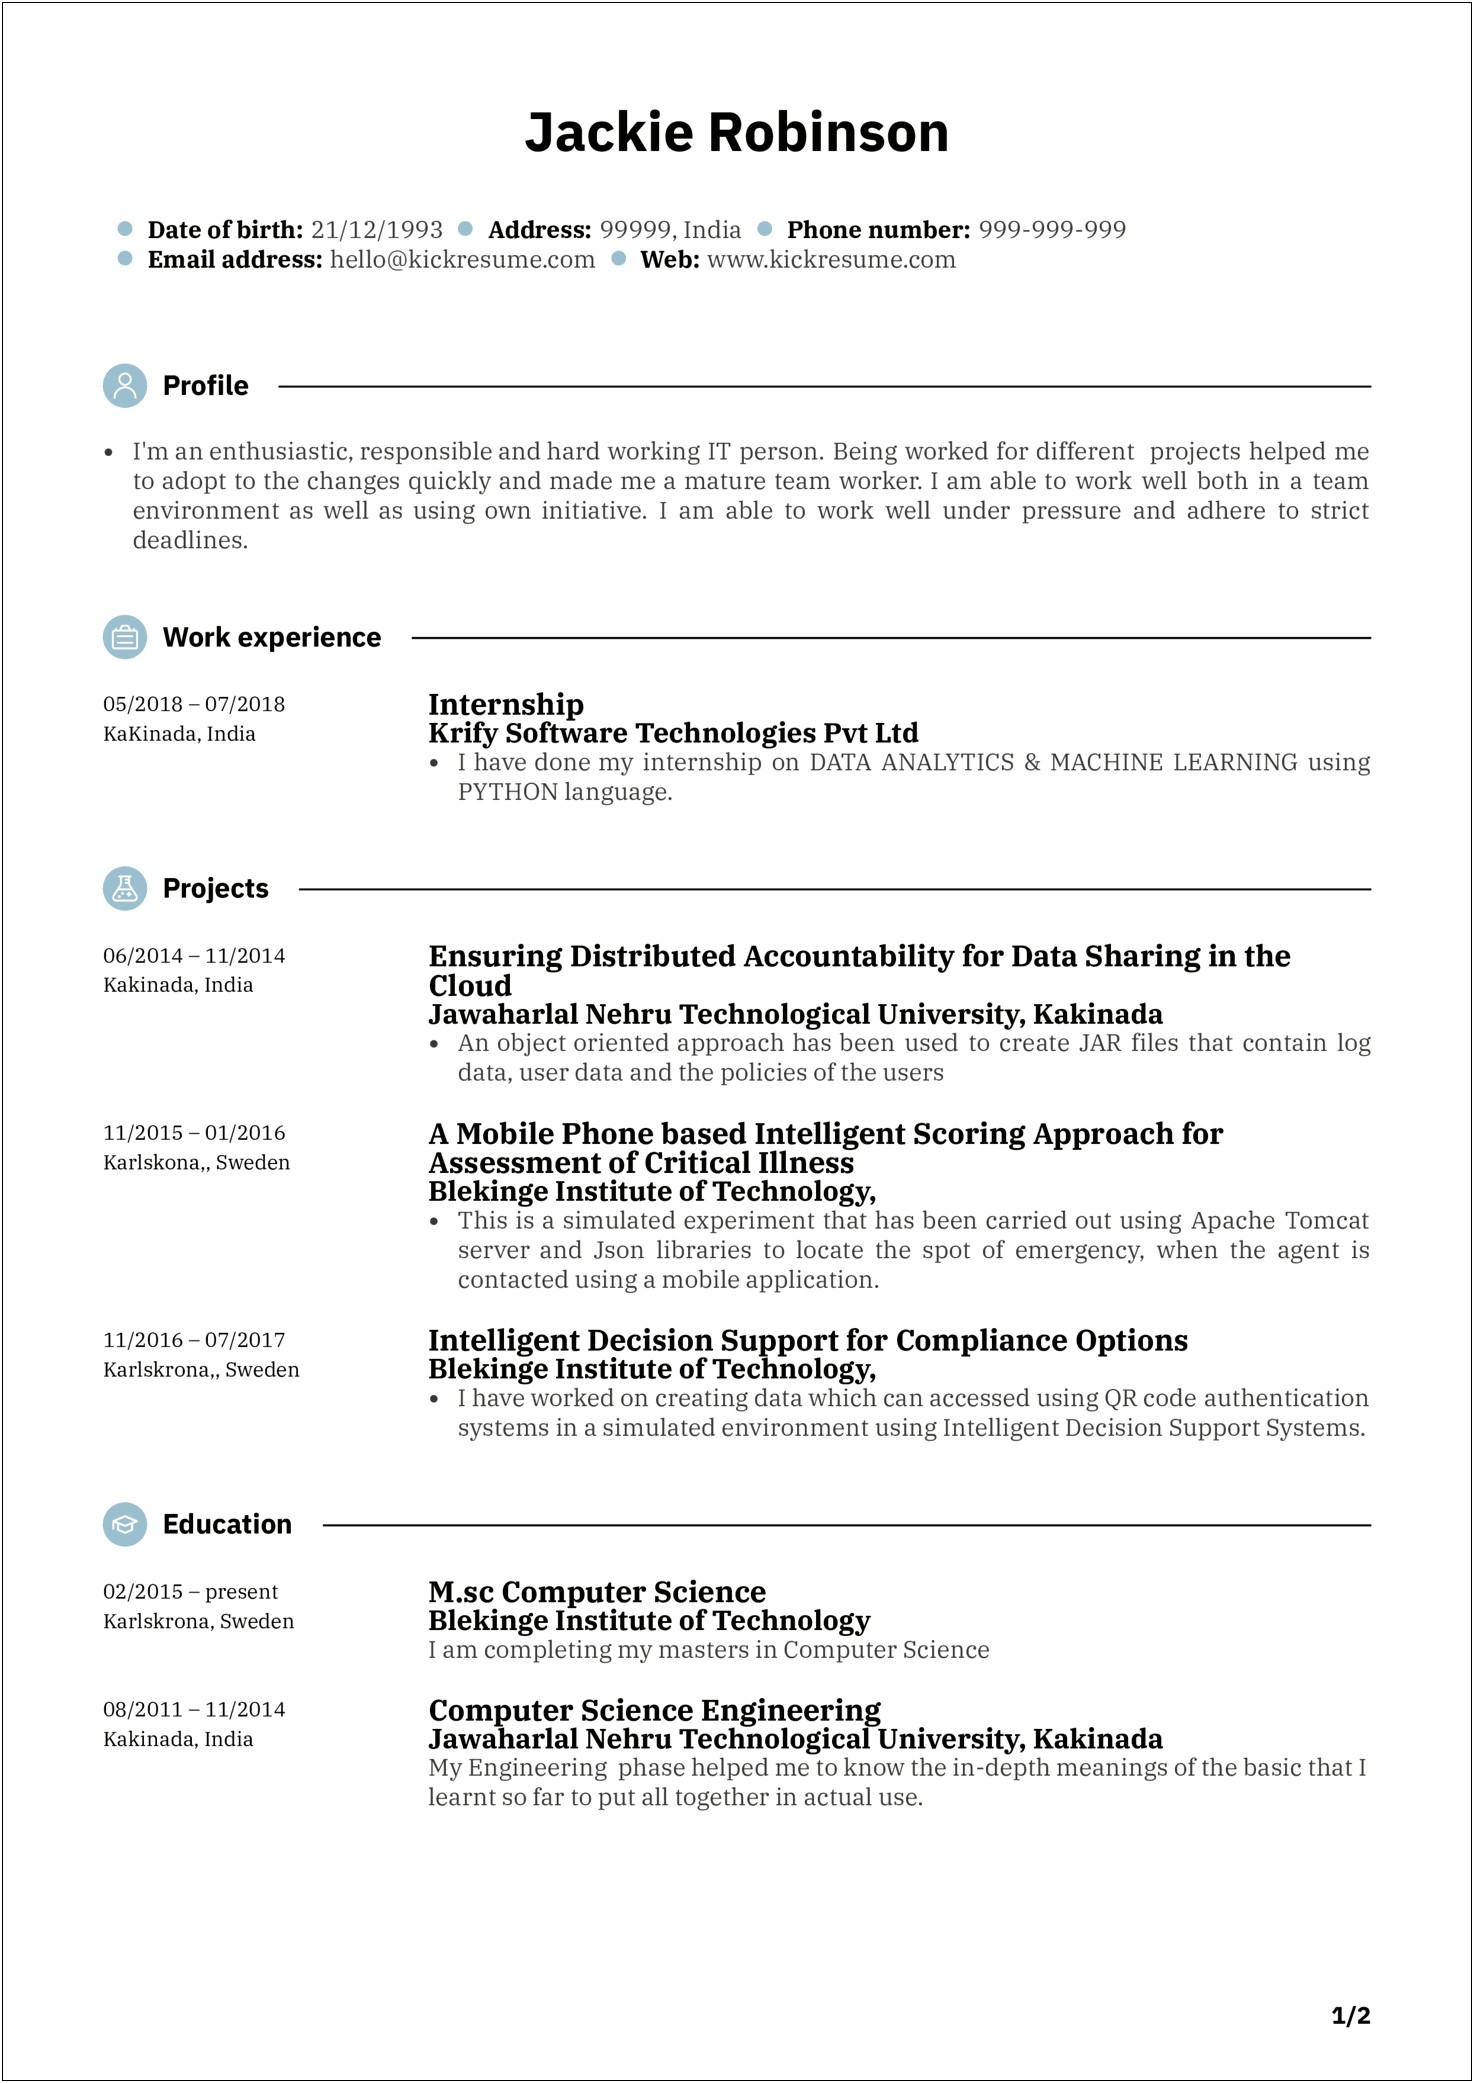 Example Resume For Computer Engineer